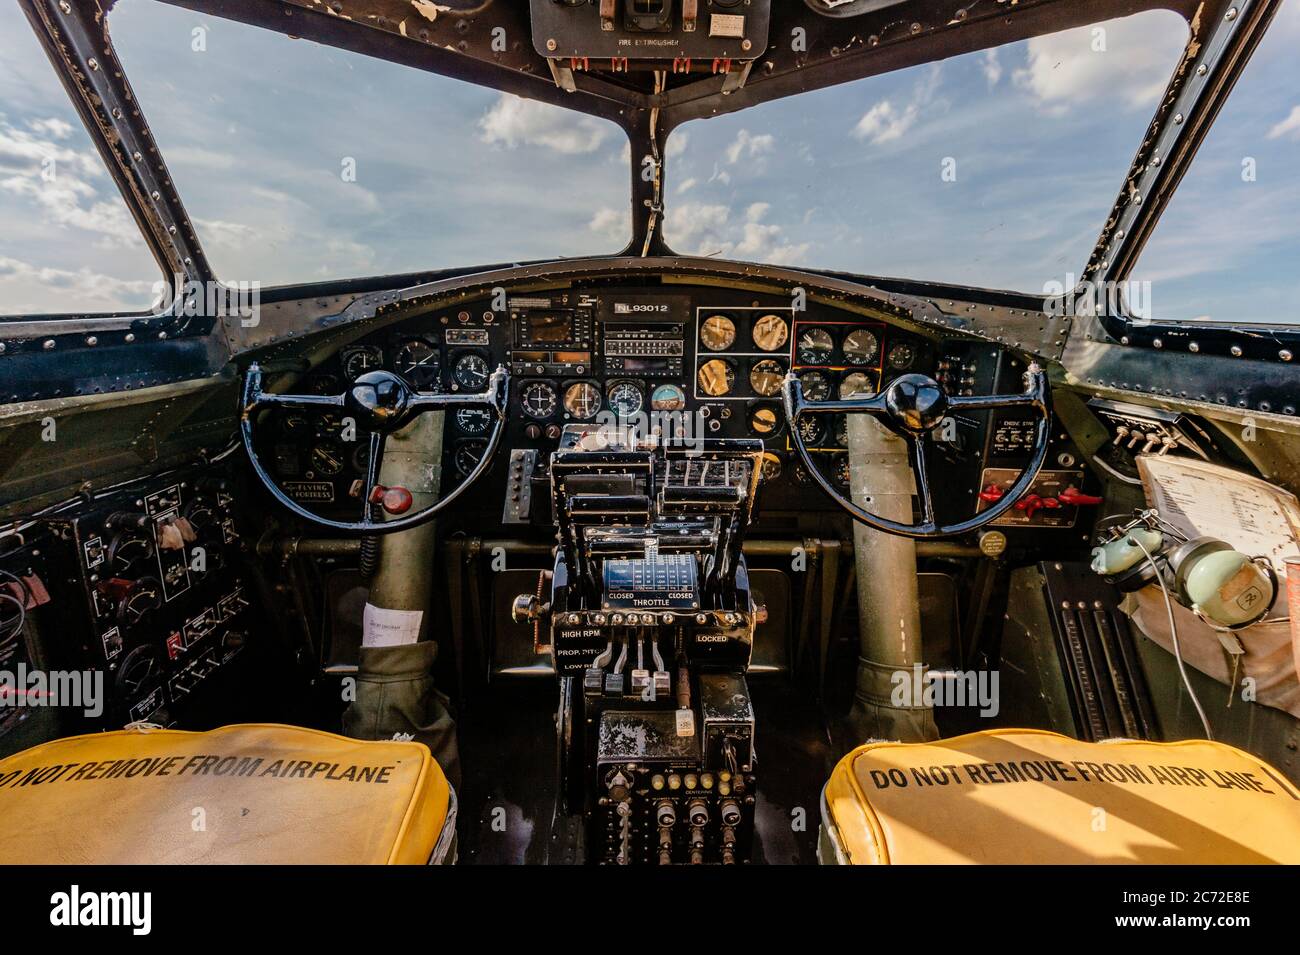 B-17 Flying Fortress interior cockpit from the WWII bomber. Stock Photo